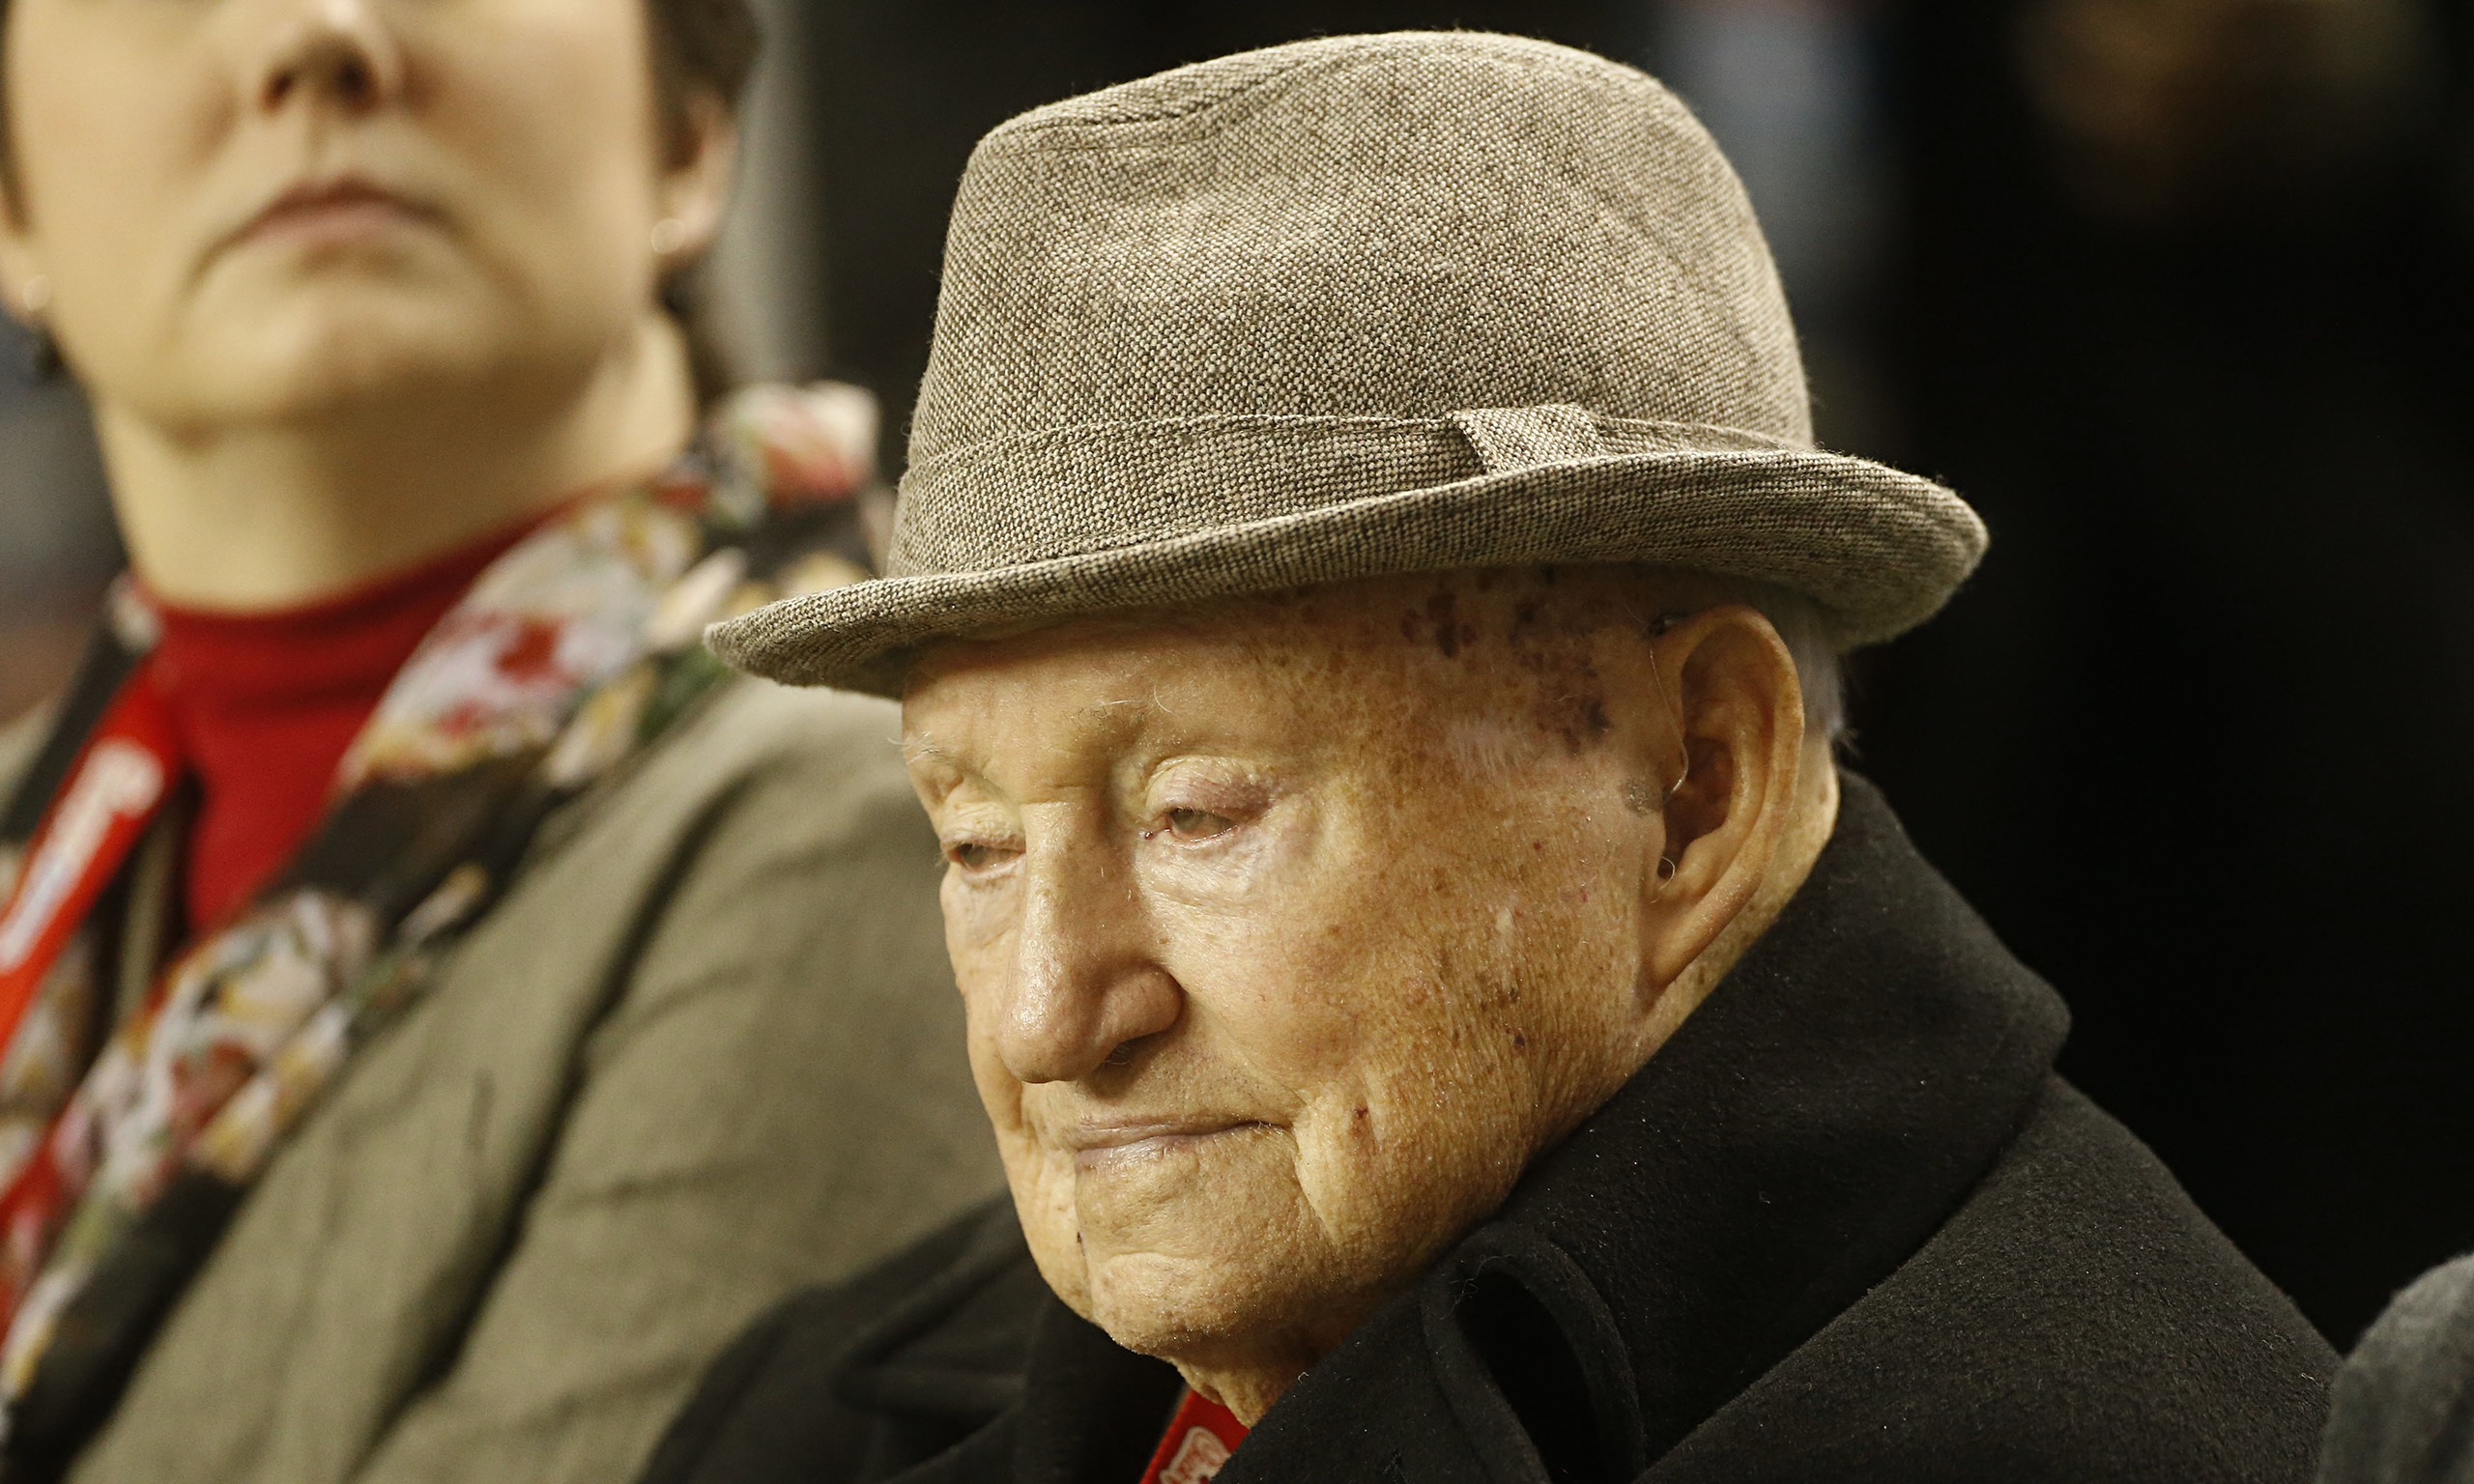 S Truett Cathy Founder Of Restaurant Chain Chick Fil A Dies Aged 93 Us News The Guardian